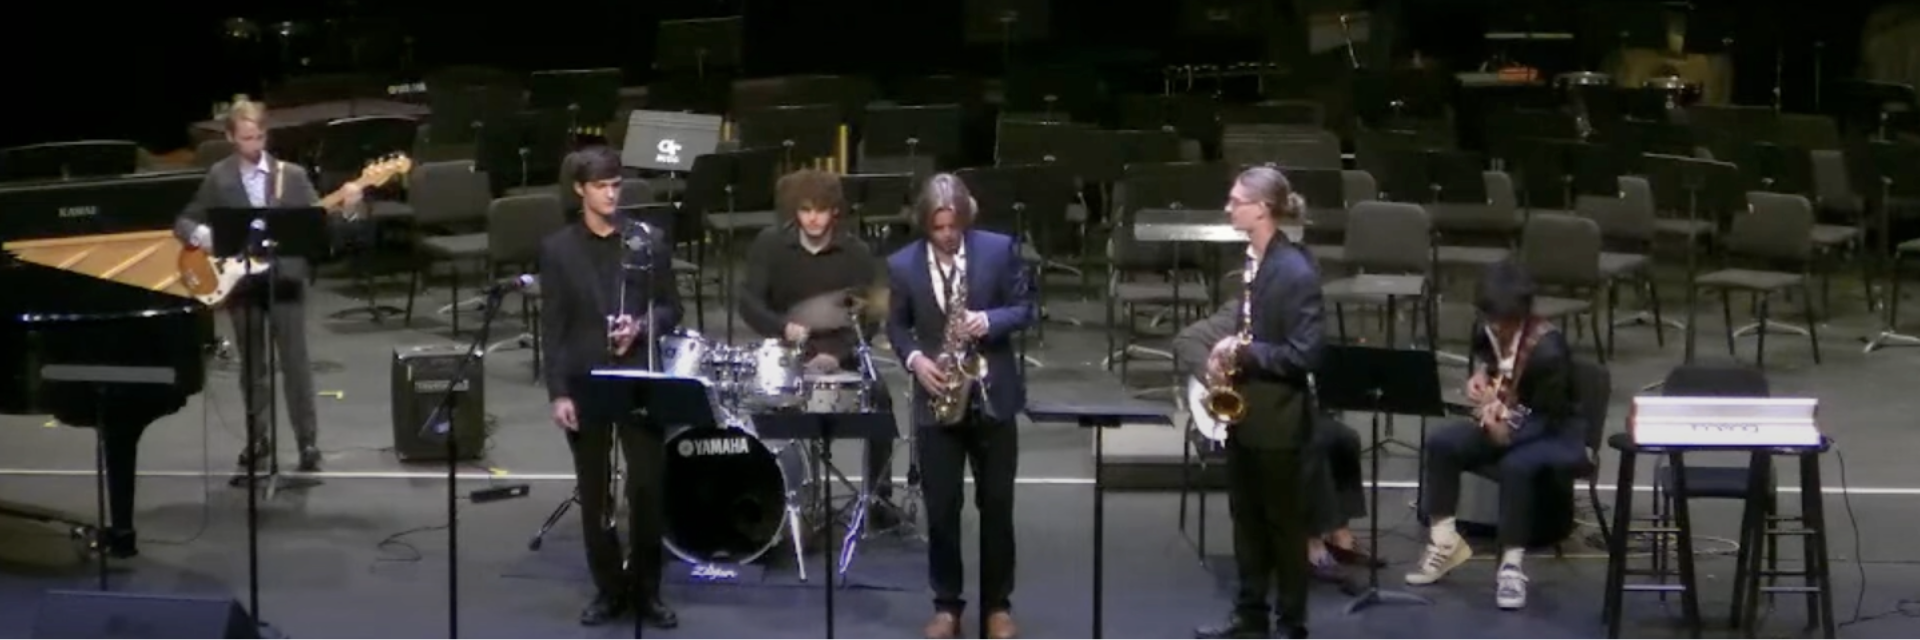 A picture of GT jazz combo playing on stage